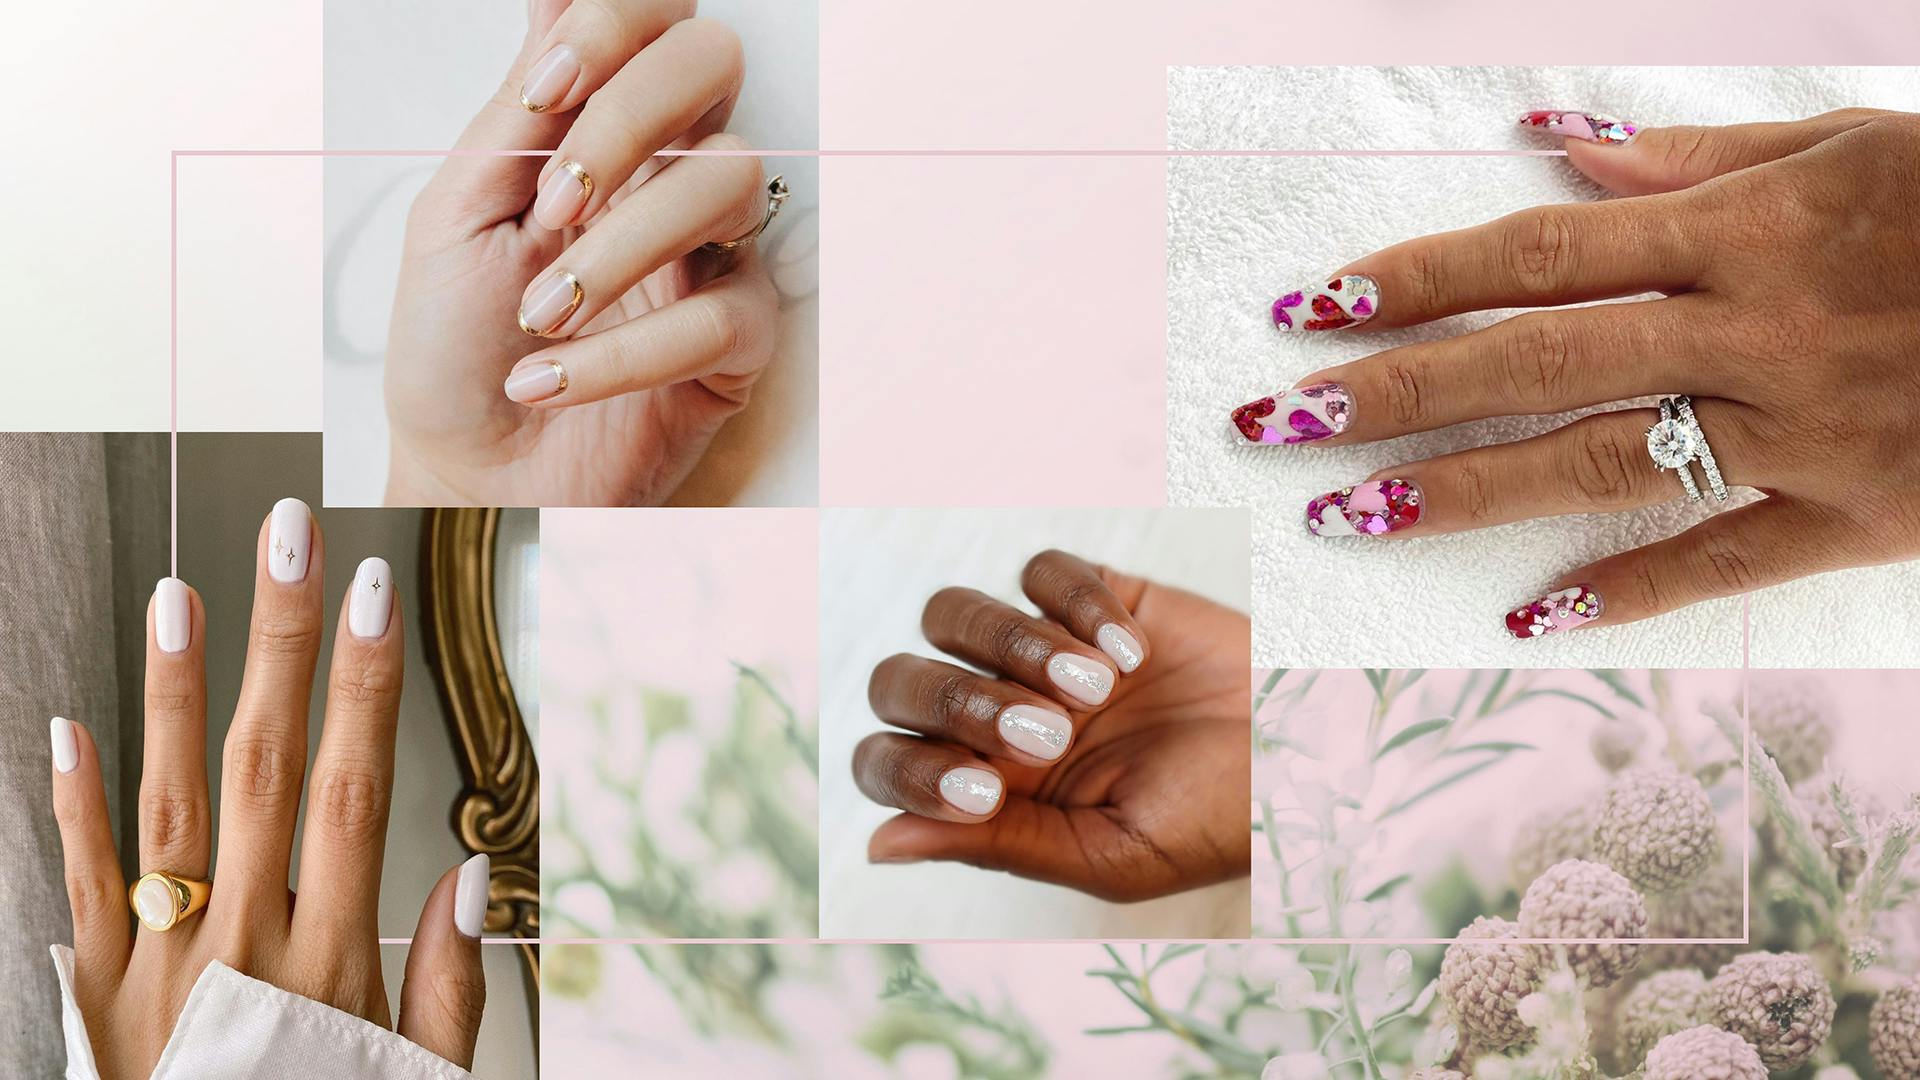 Wedding Nails: 53 Classy Wedding Nail Ideas for Every Style of Bride -  hitched.co.uk - hitched.co.uk